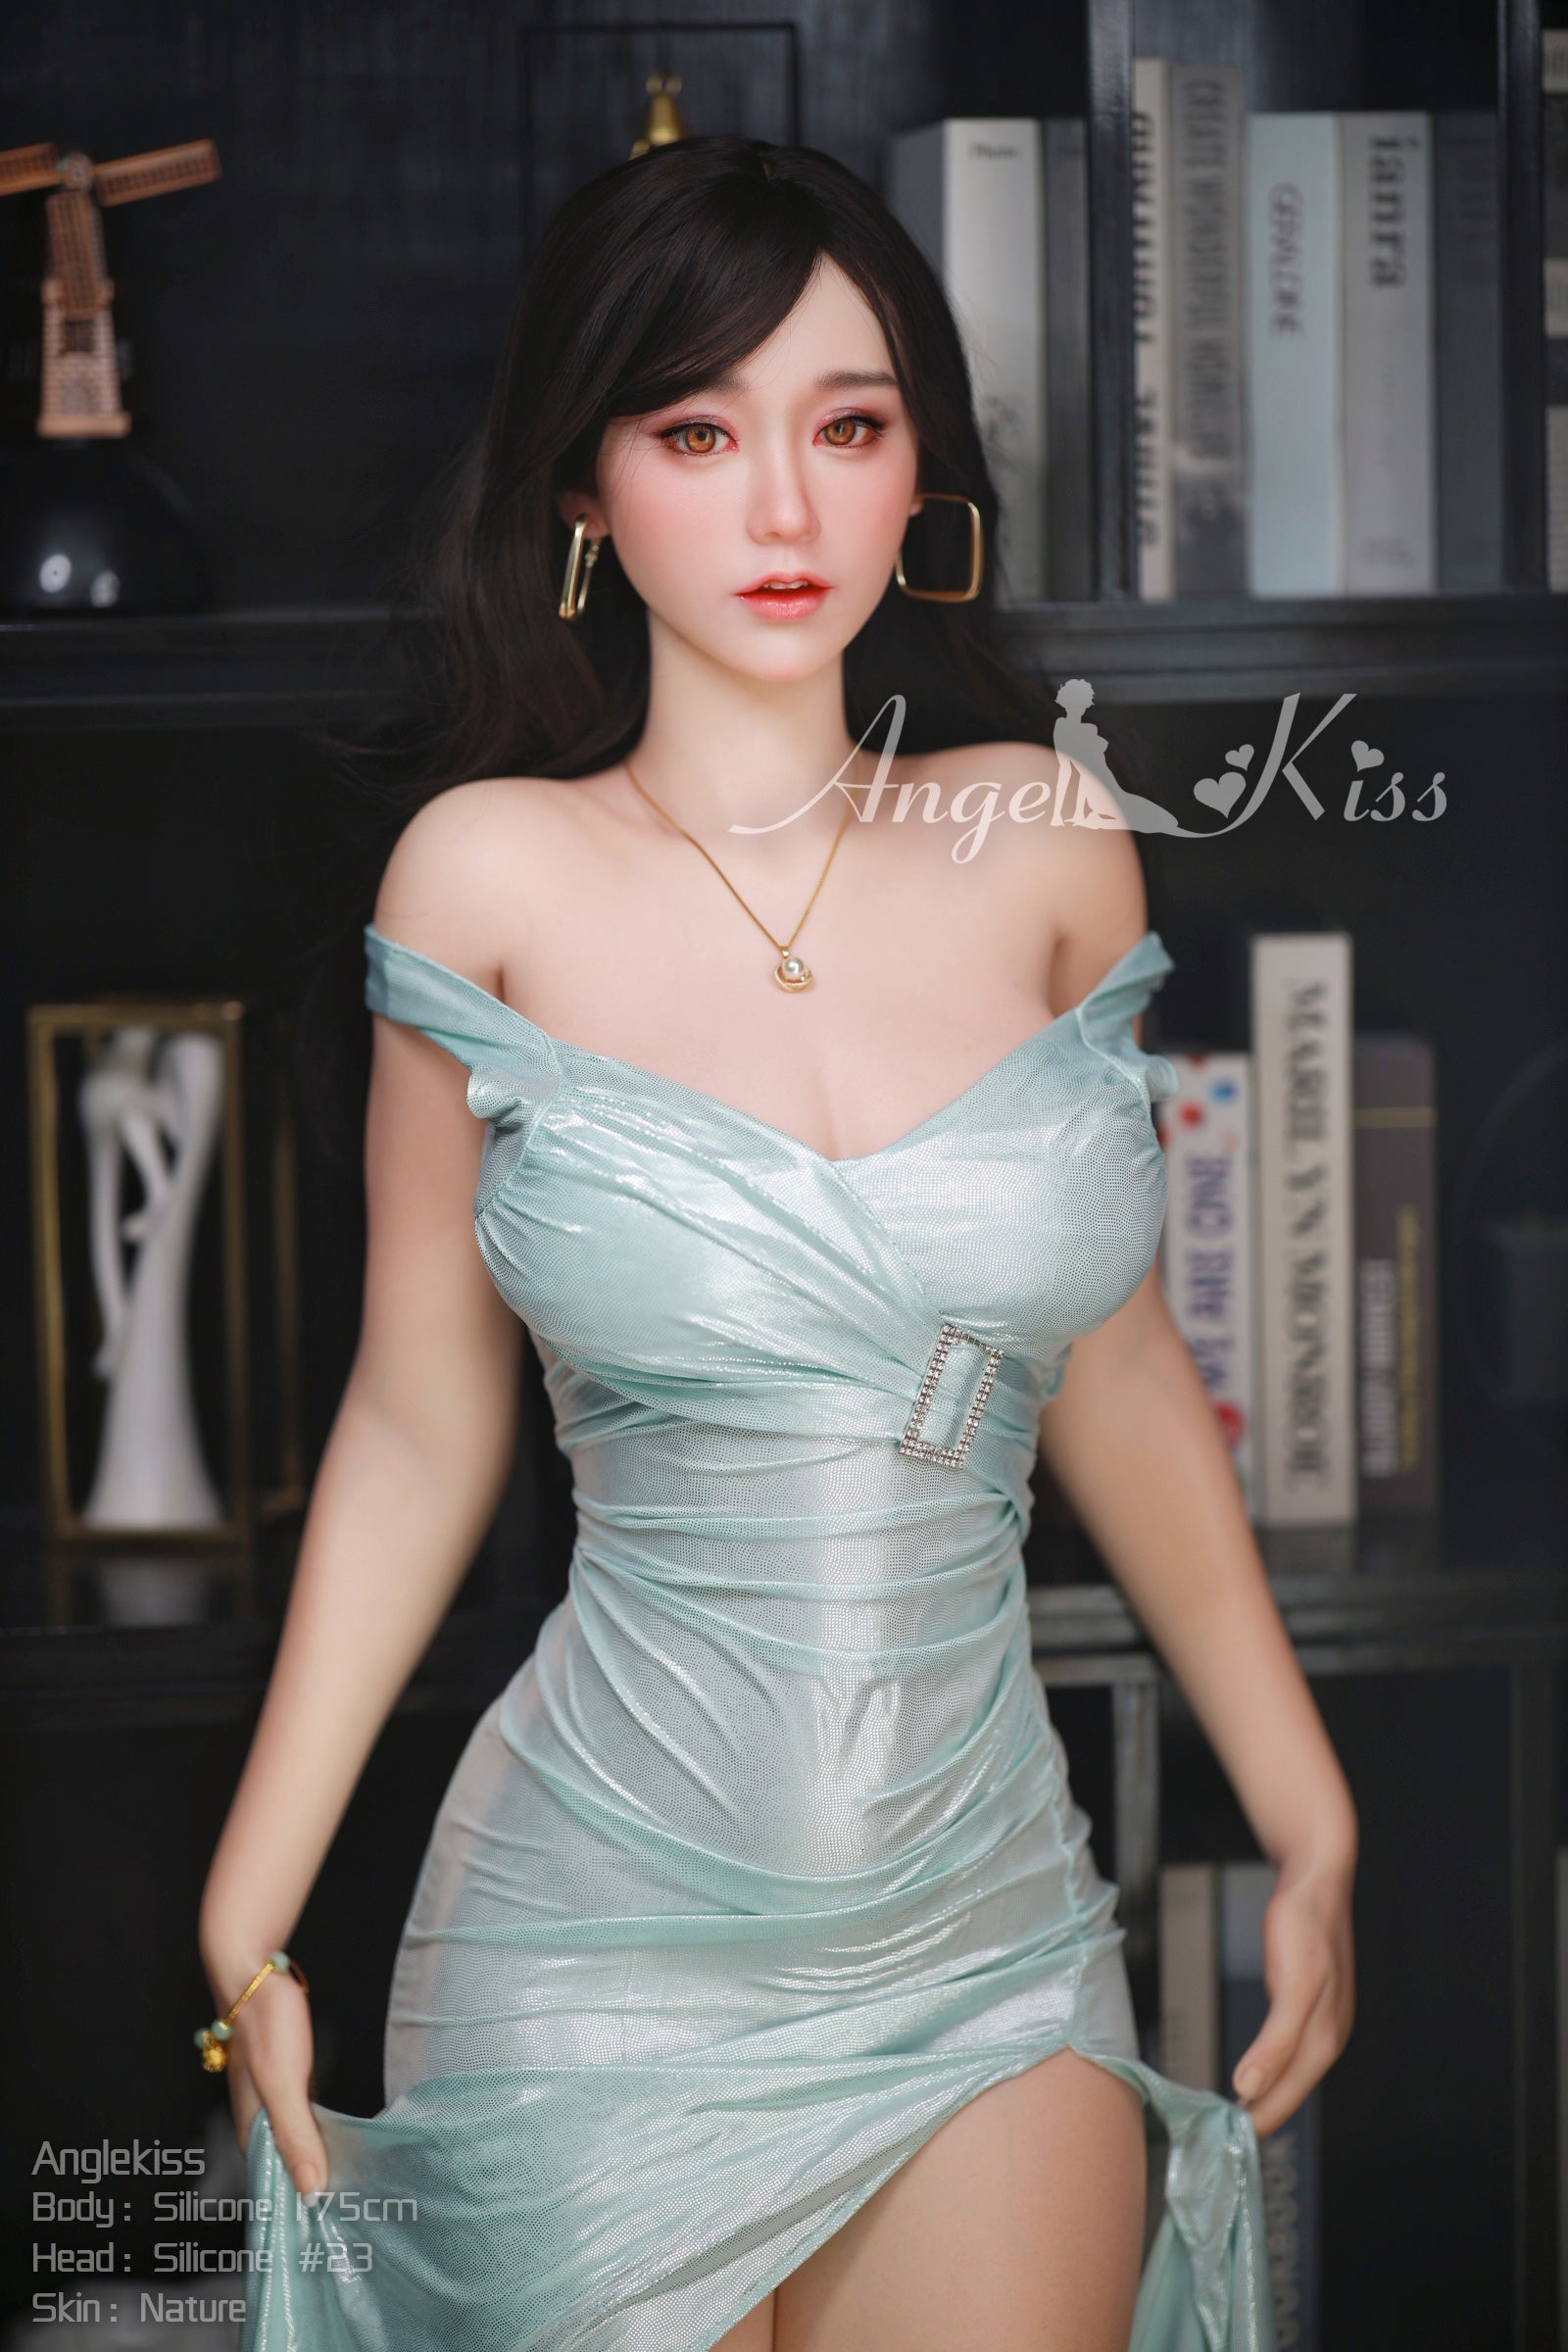 Angelkiss Doll 175 cm Silicone - Sora | Buy Sex Dolls at DOLLS ACTUALLY